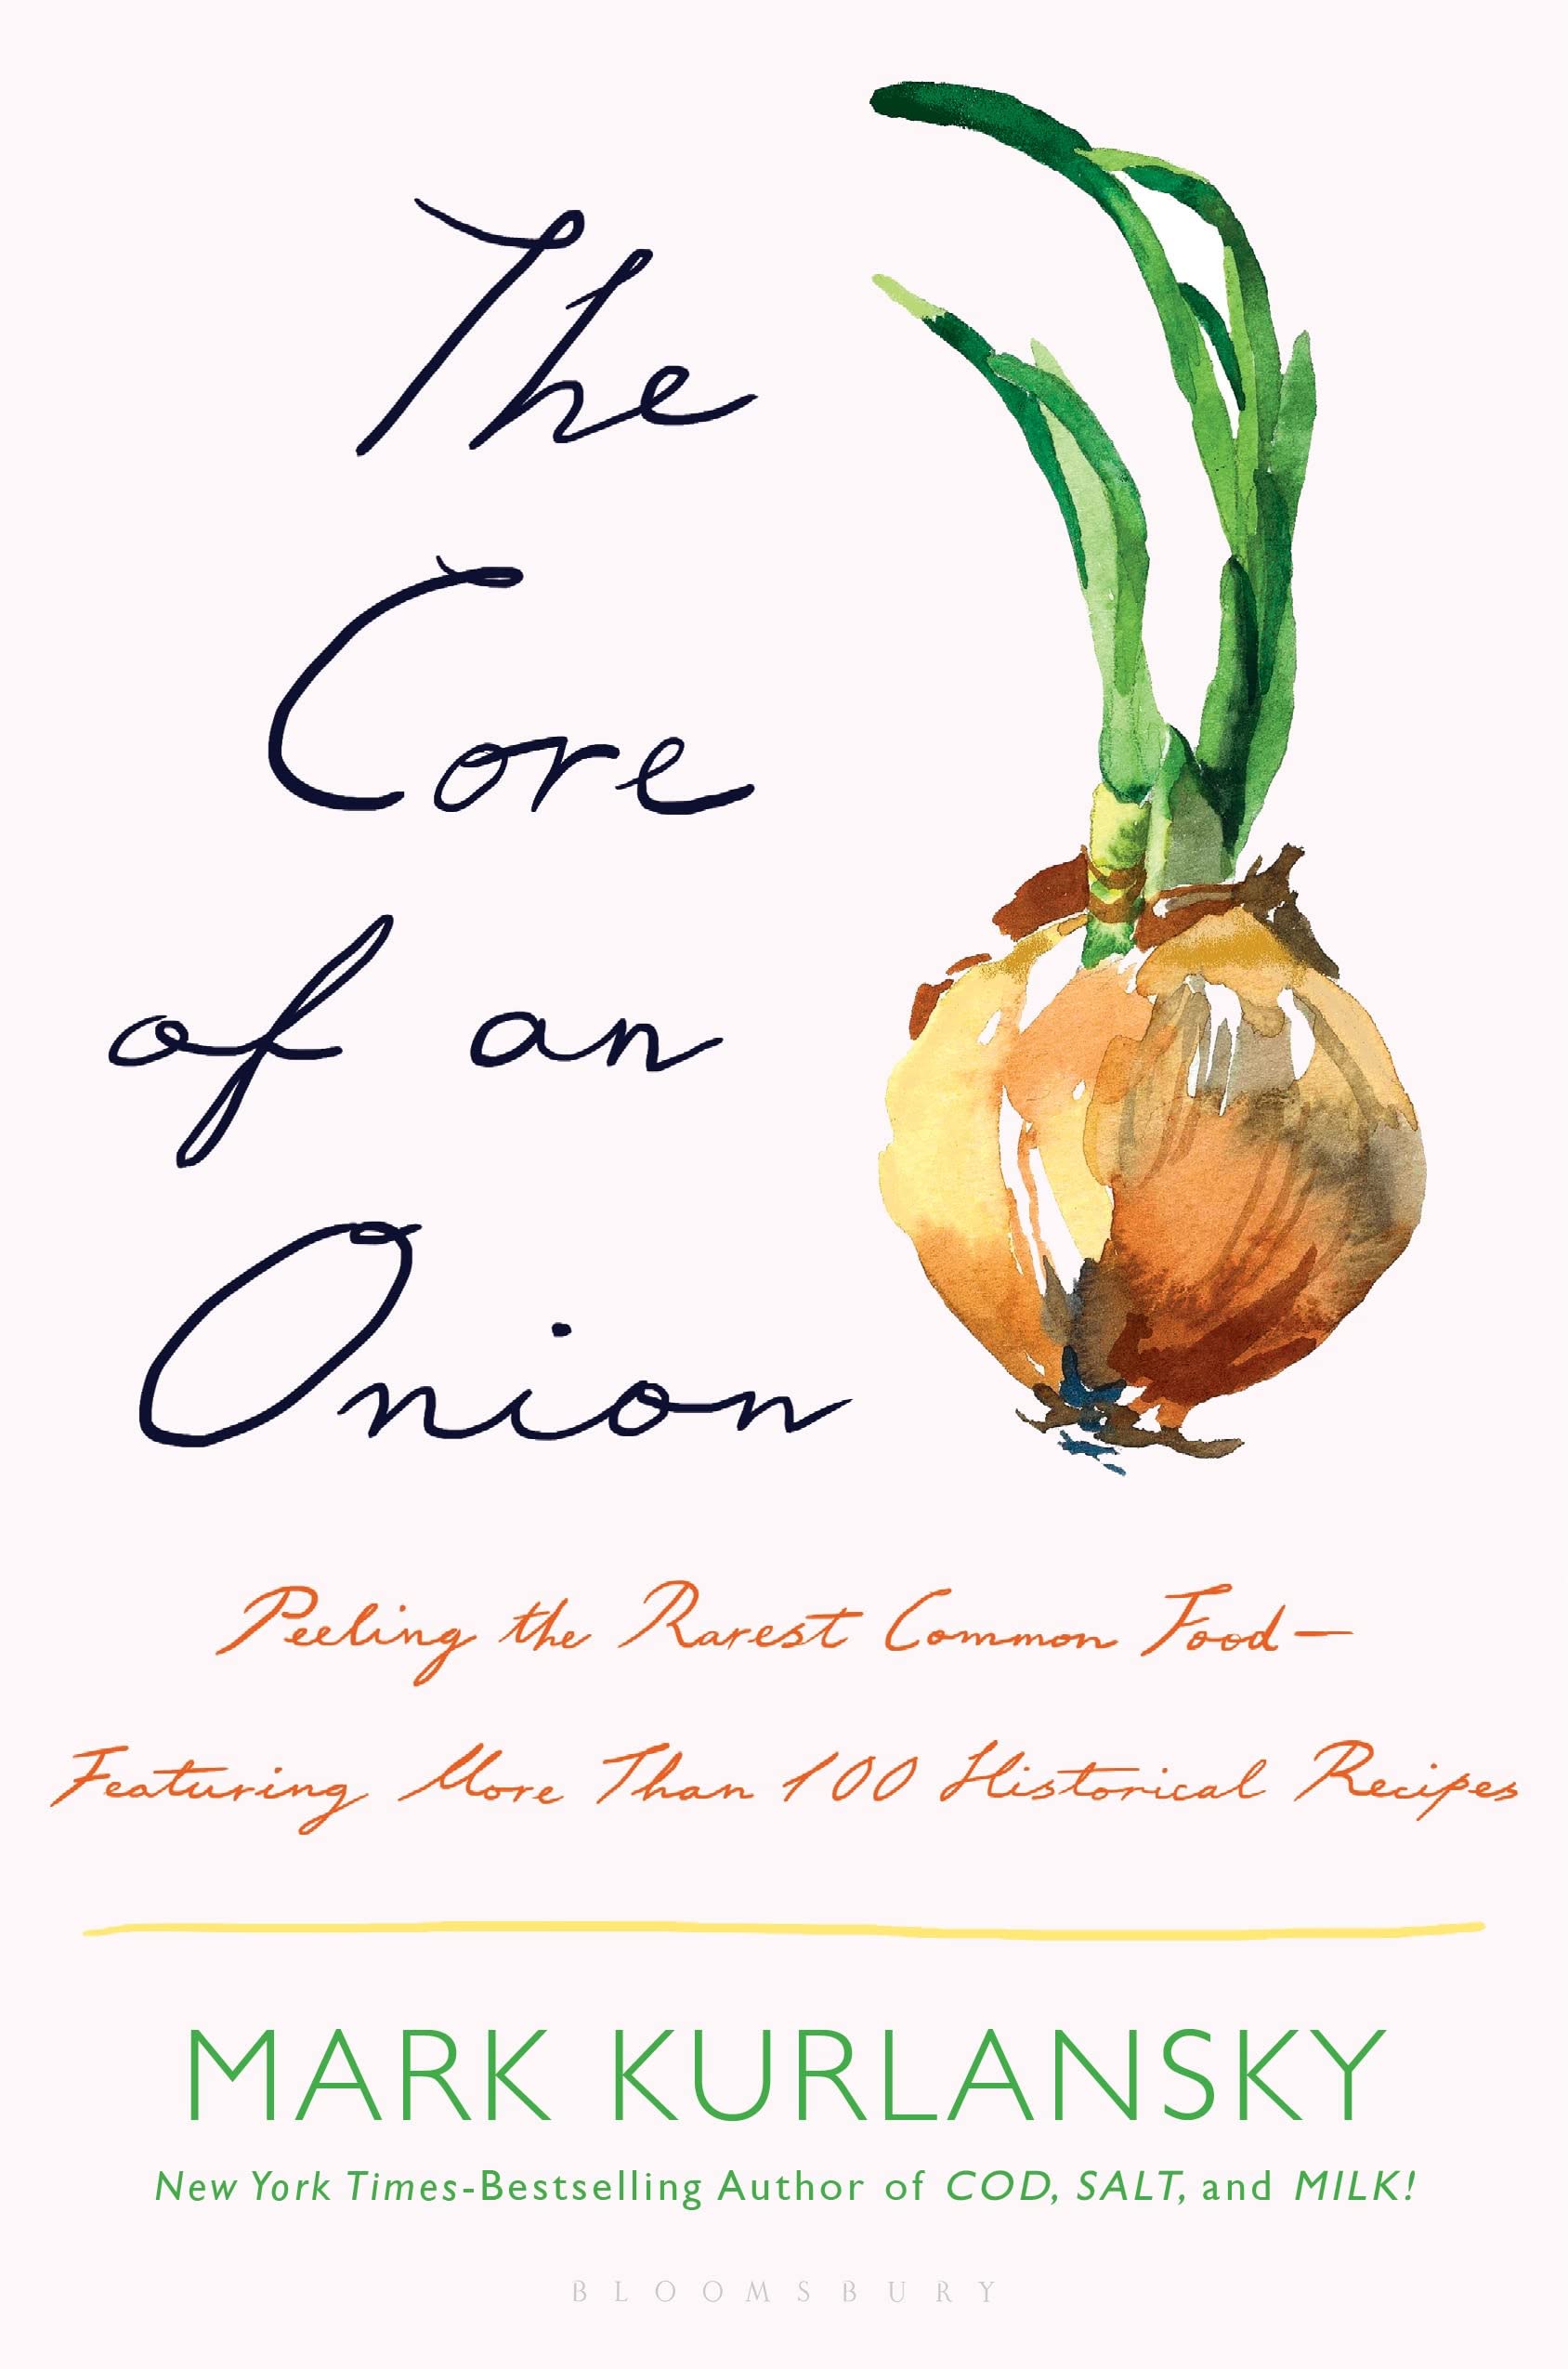 The Core of an Onion: Peeling the Rarest Common Food―Featuring More Than 100 Historical Recipes (Mark Kurlansky)